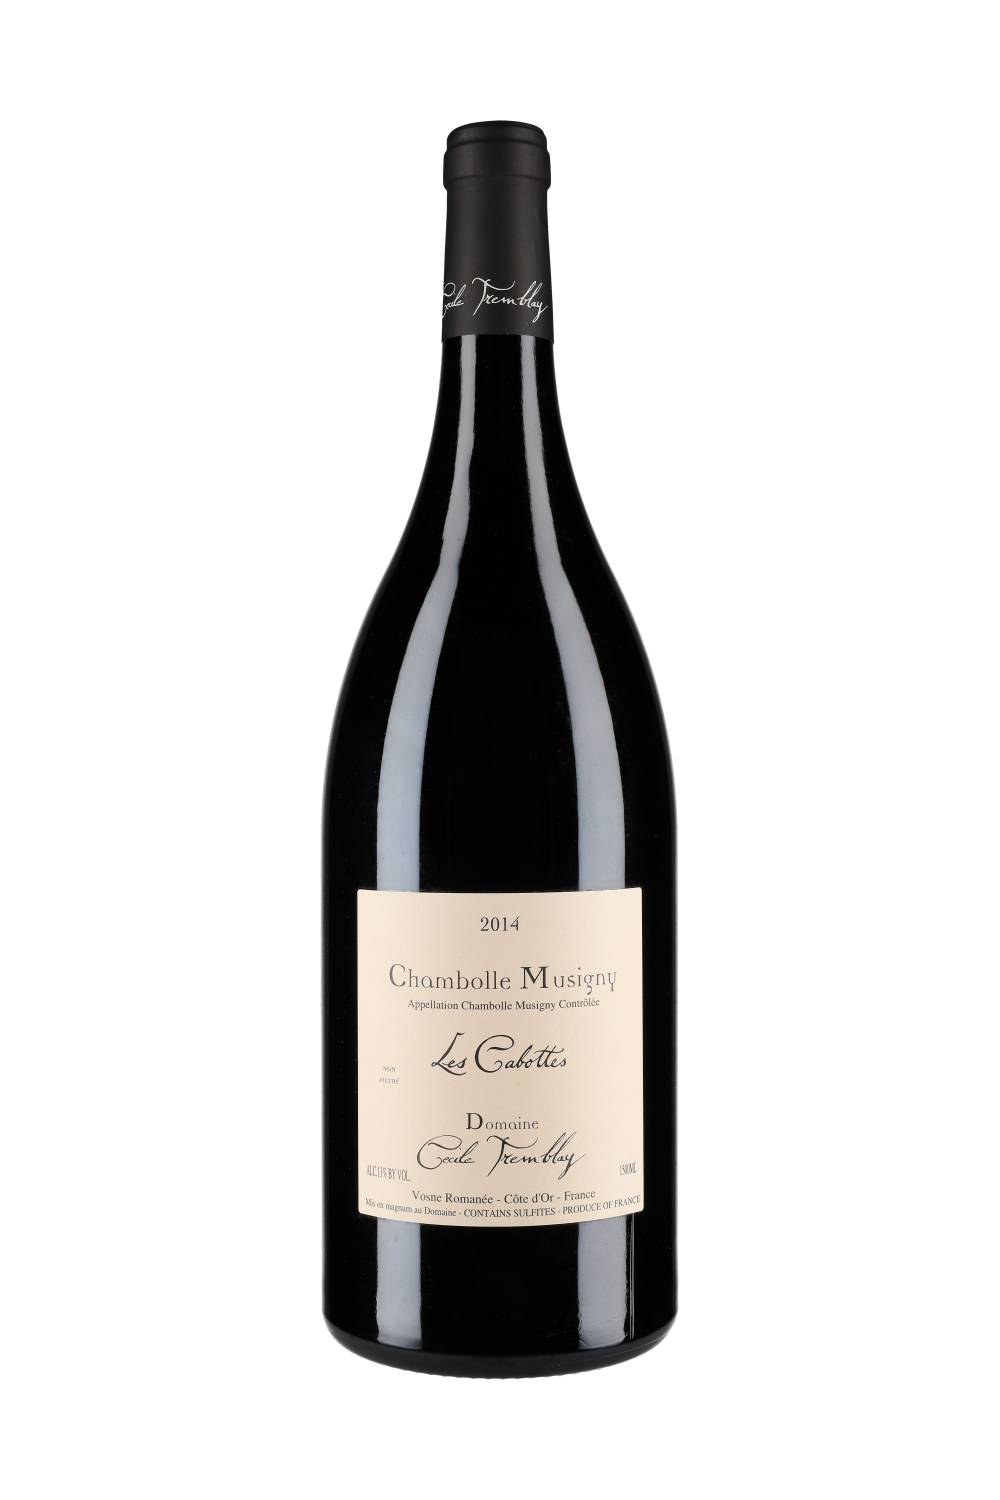 Domaine Cécile Tremblay Chambolle-Musigny Les Cabottes 2014 Magnum